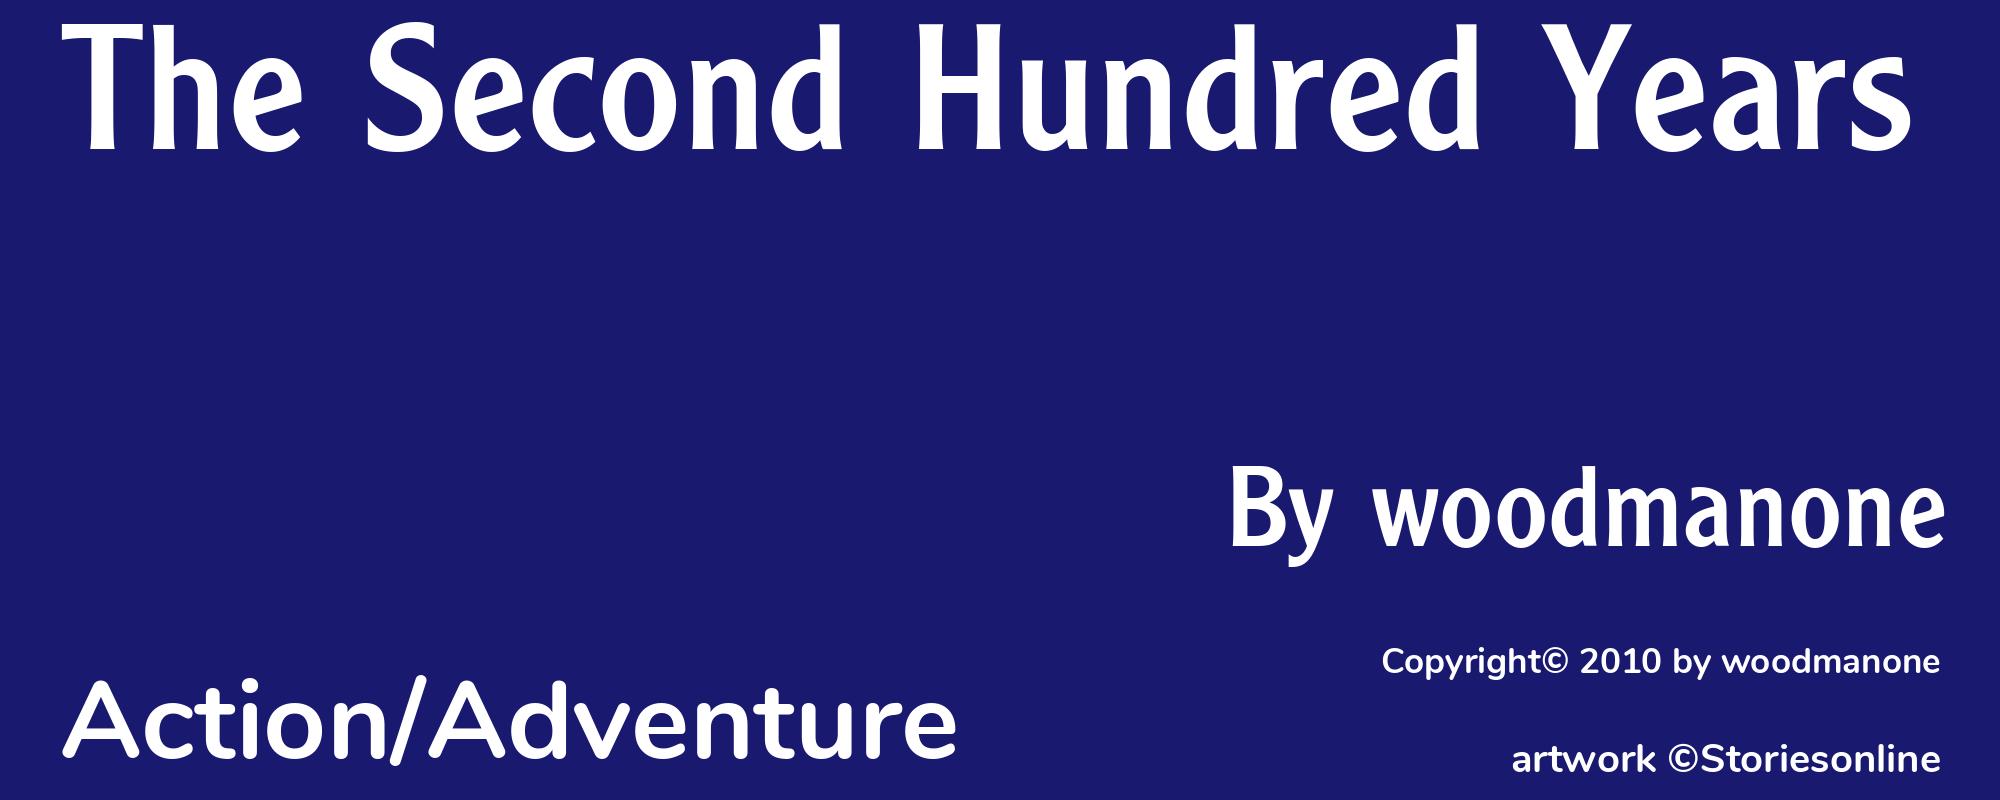 The Second Hundred Years - Cover